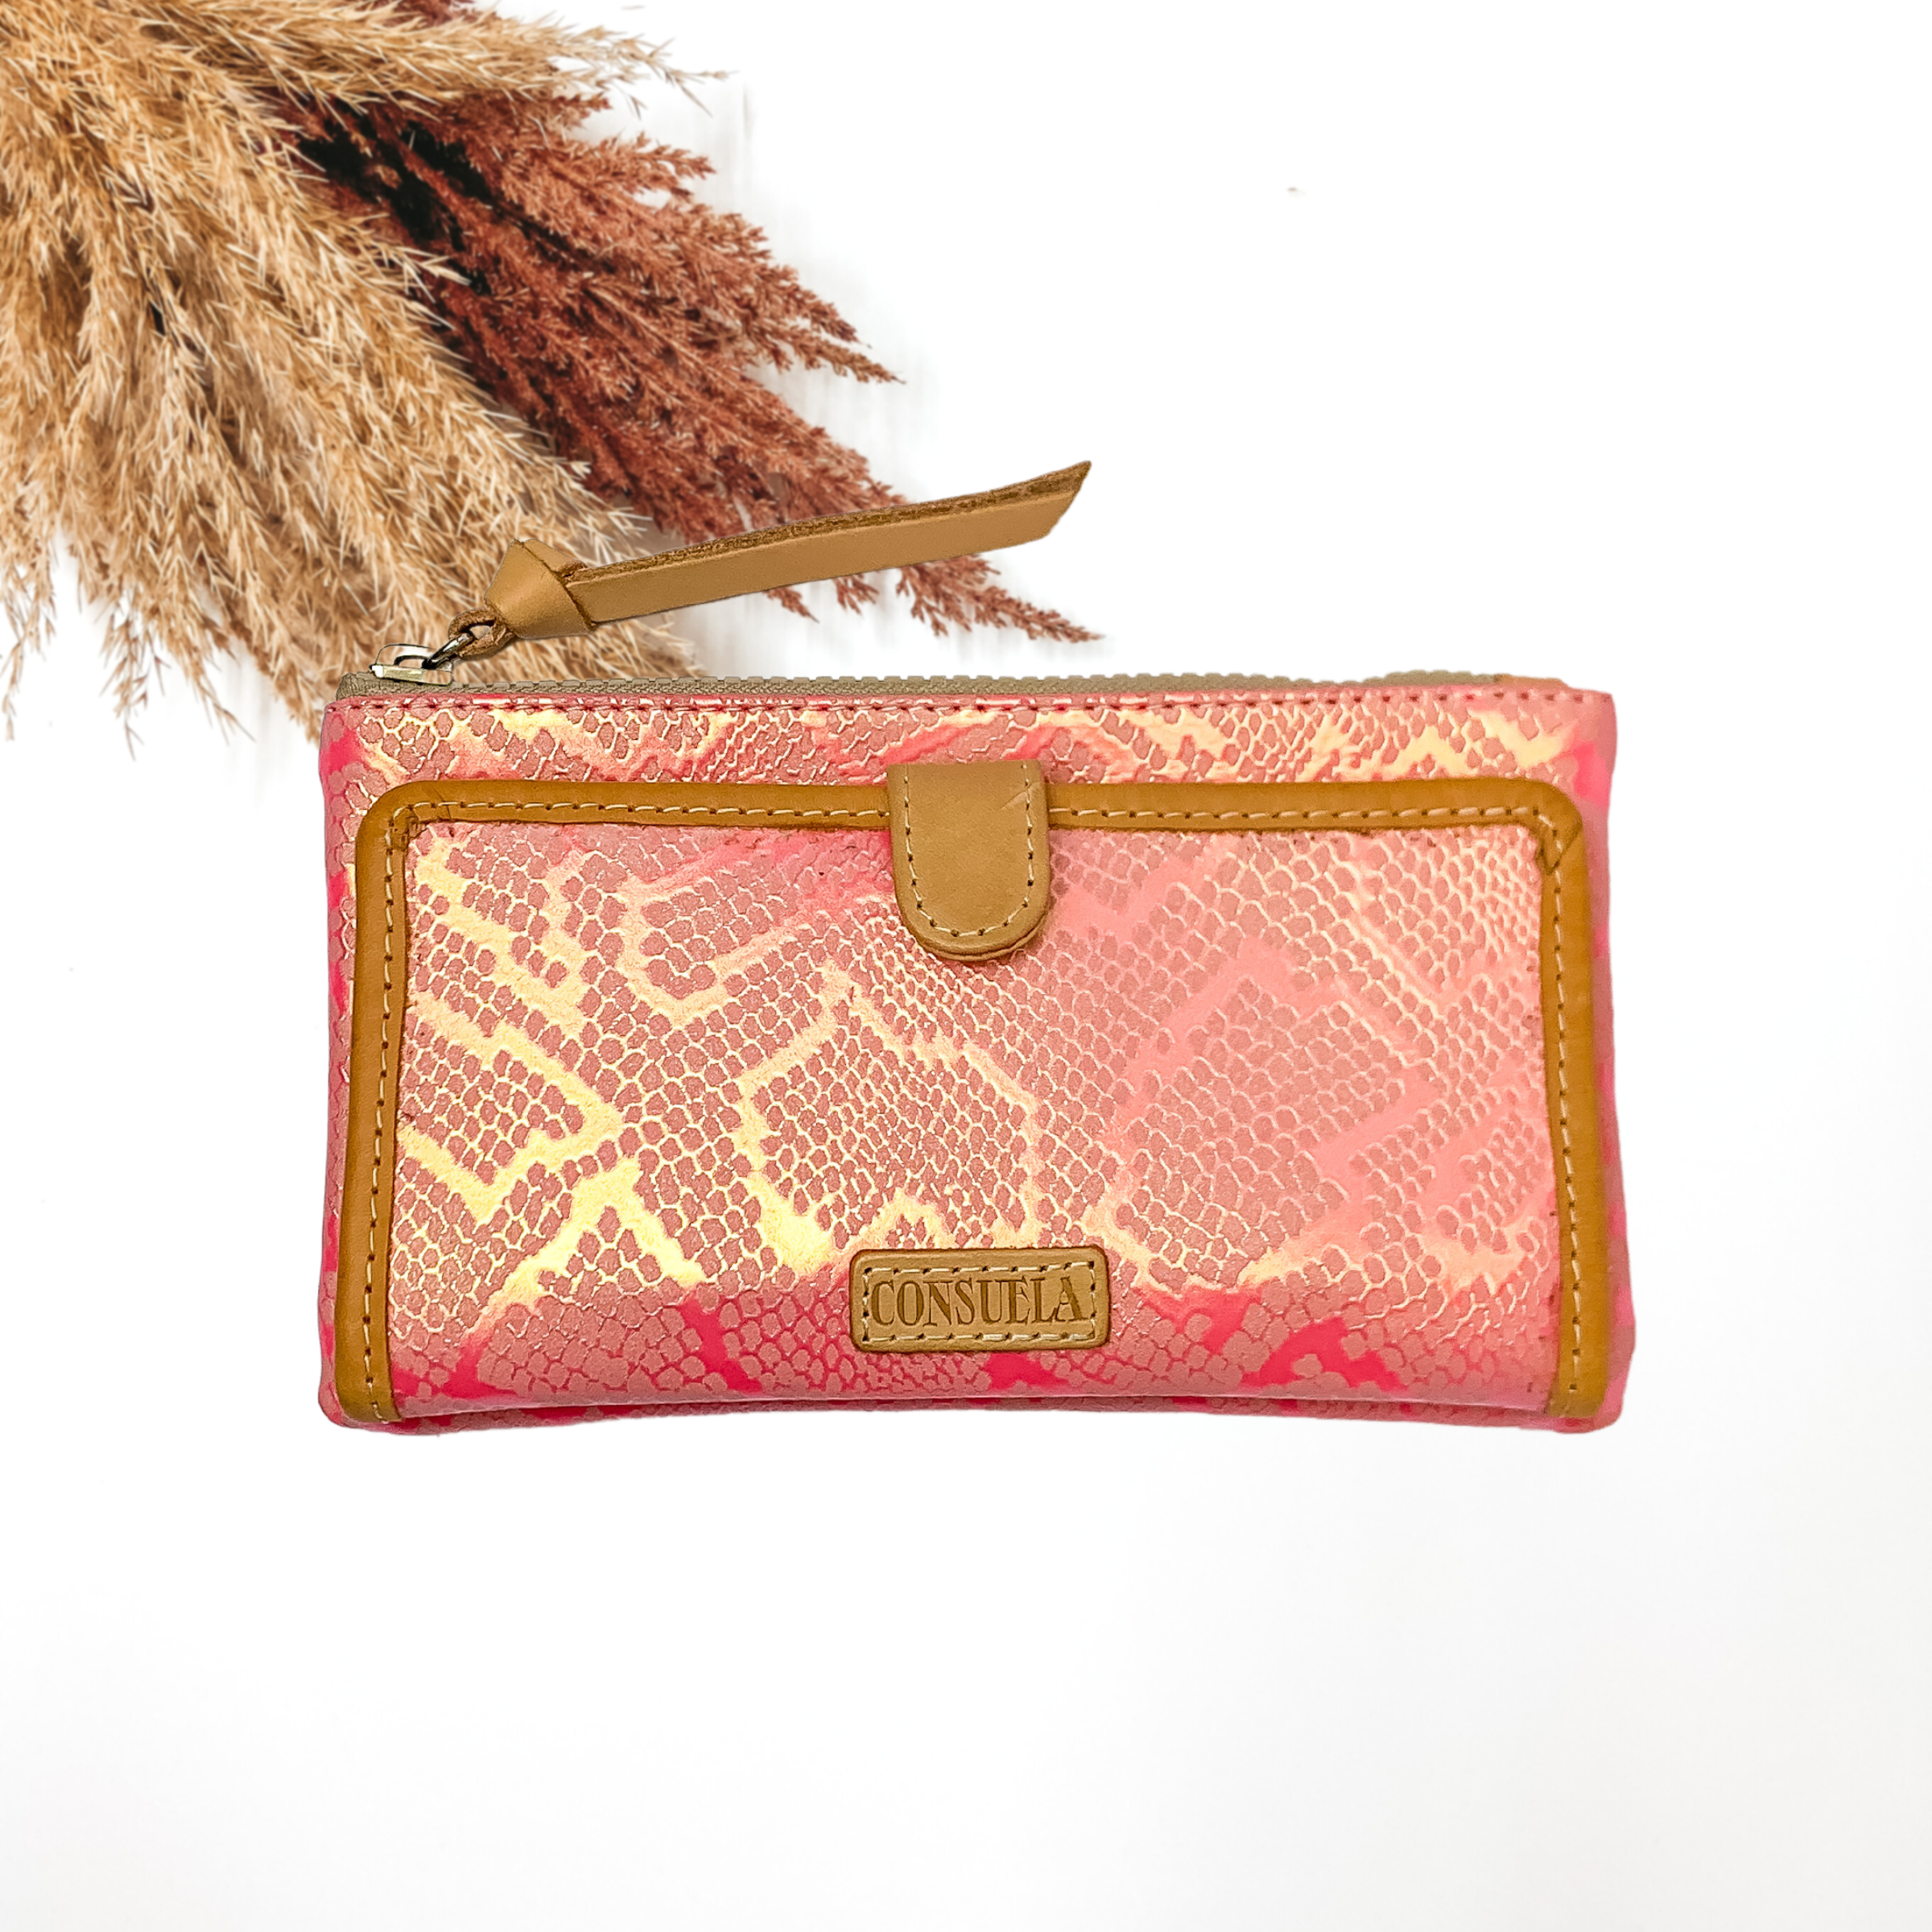 Pink, iridescent snakeskin print wallet with a front closure and top zipper. This wallet also includes a light tan tassel and a light tan outline on the front flap. This wallet is pictured on a whte background with brown pompous grass in the top left corner. 